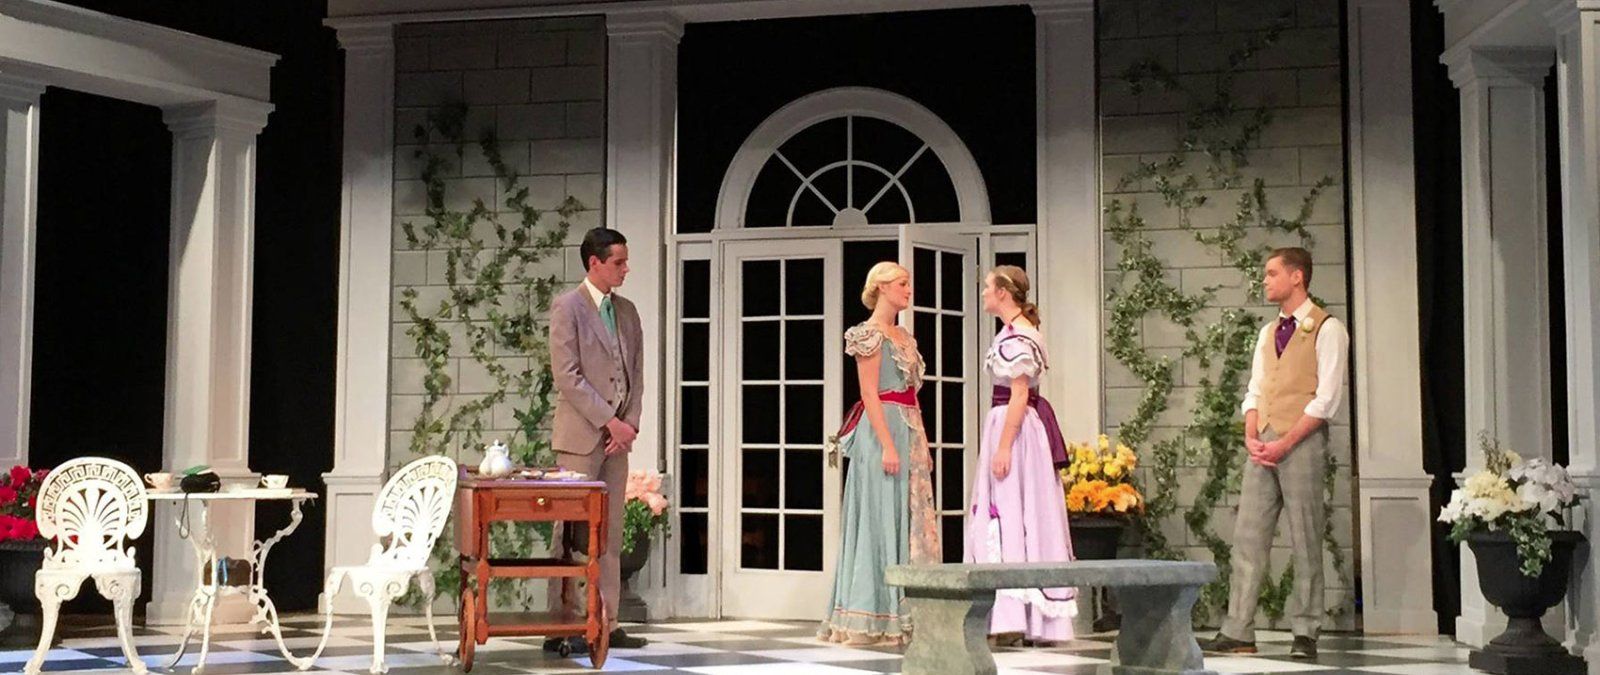 Two men and two women gently conversing on the stage of The Importance of Being Ernest